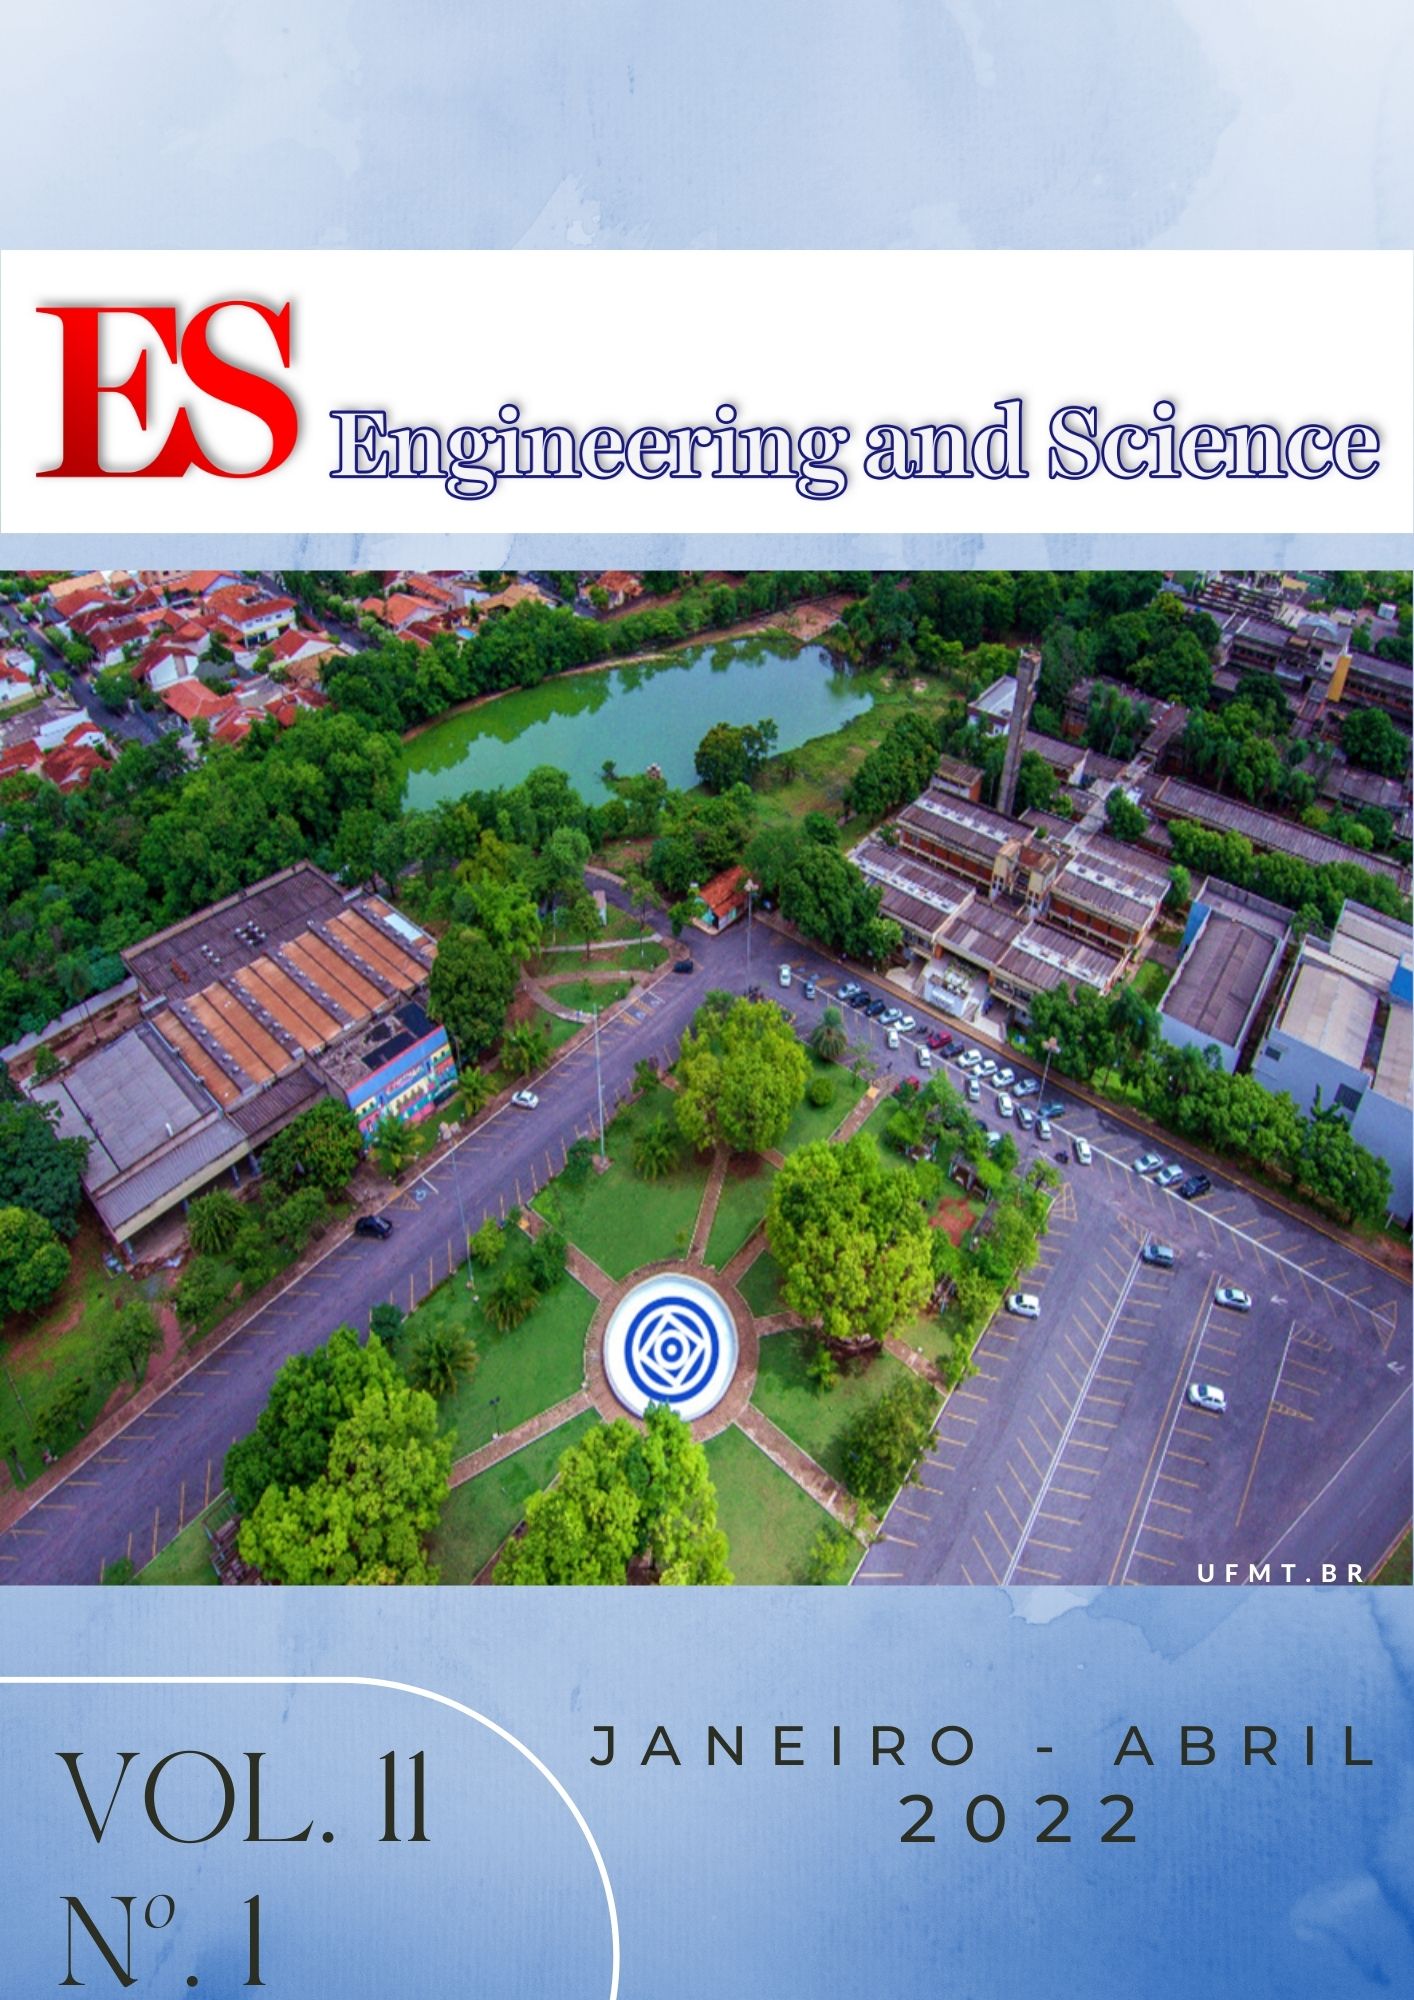 					Visualizar v. 11 n. 1 (2022): E&S Engineering and Science| Dezembro - Abril (2022)
				